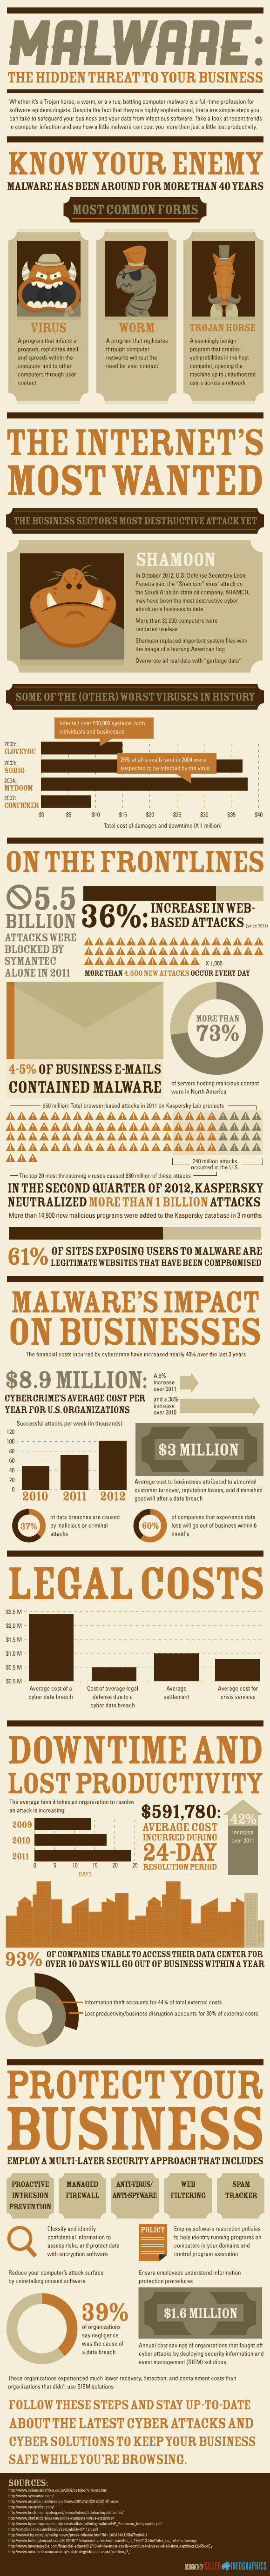 Malware - The Hidden Threat to Your Business